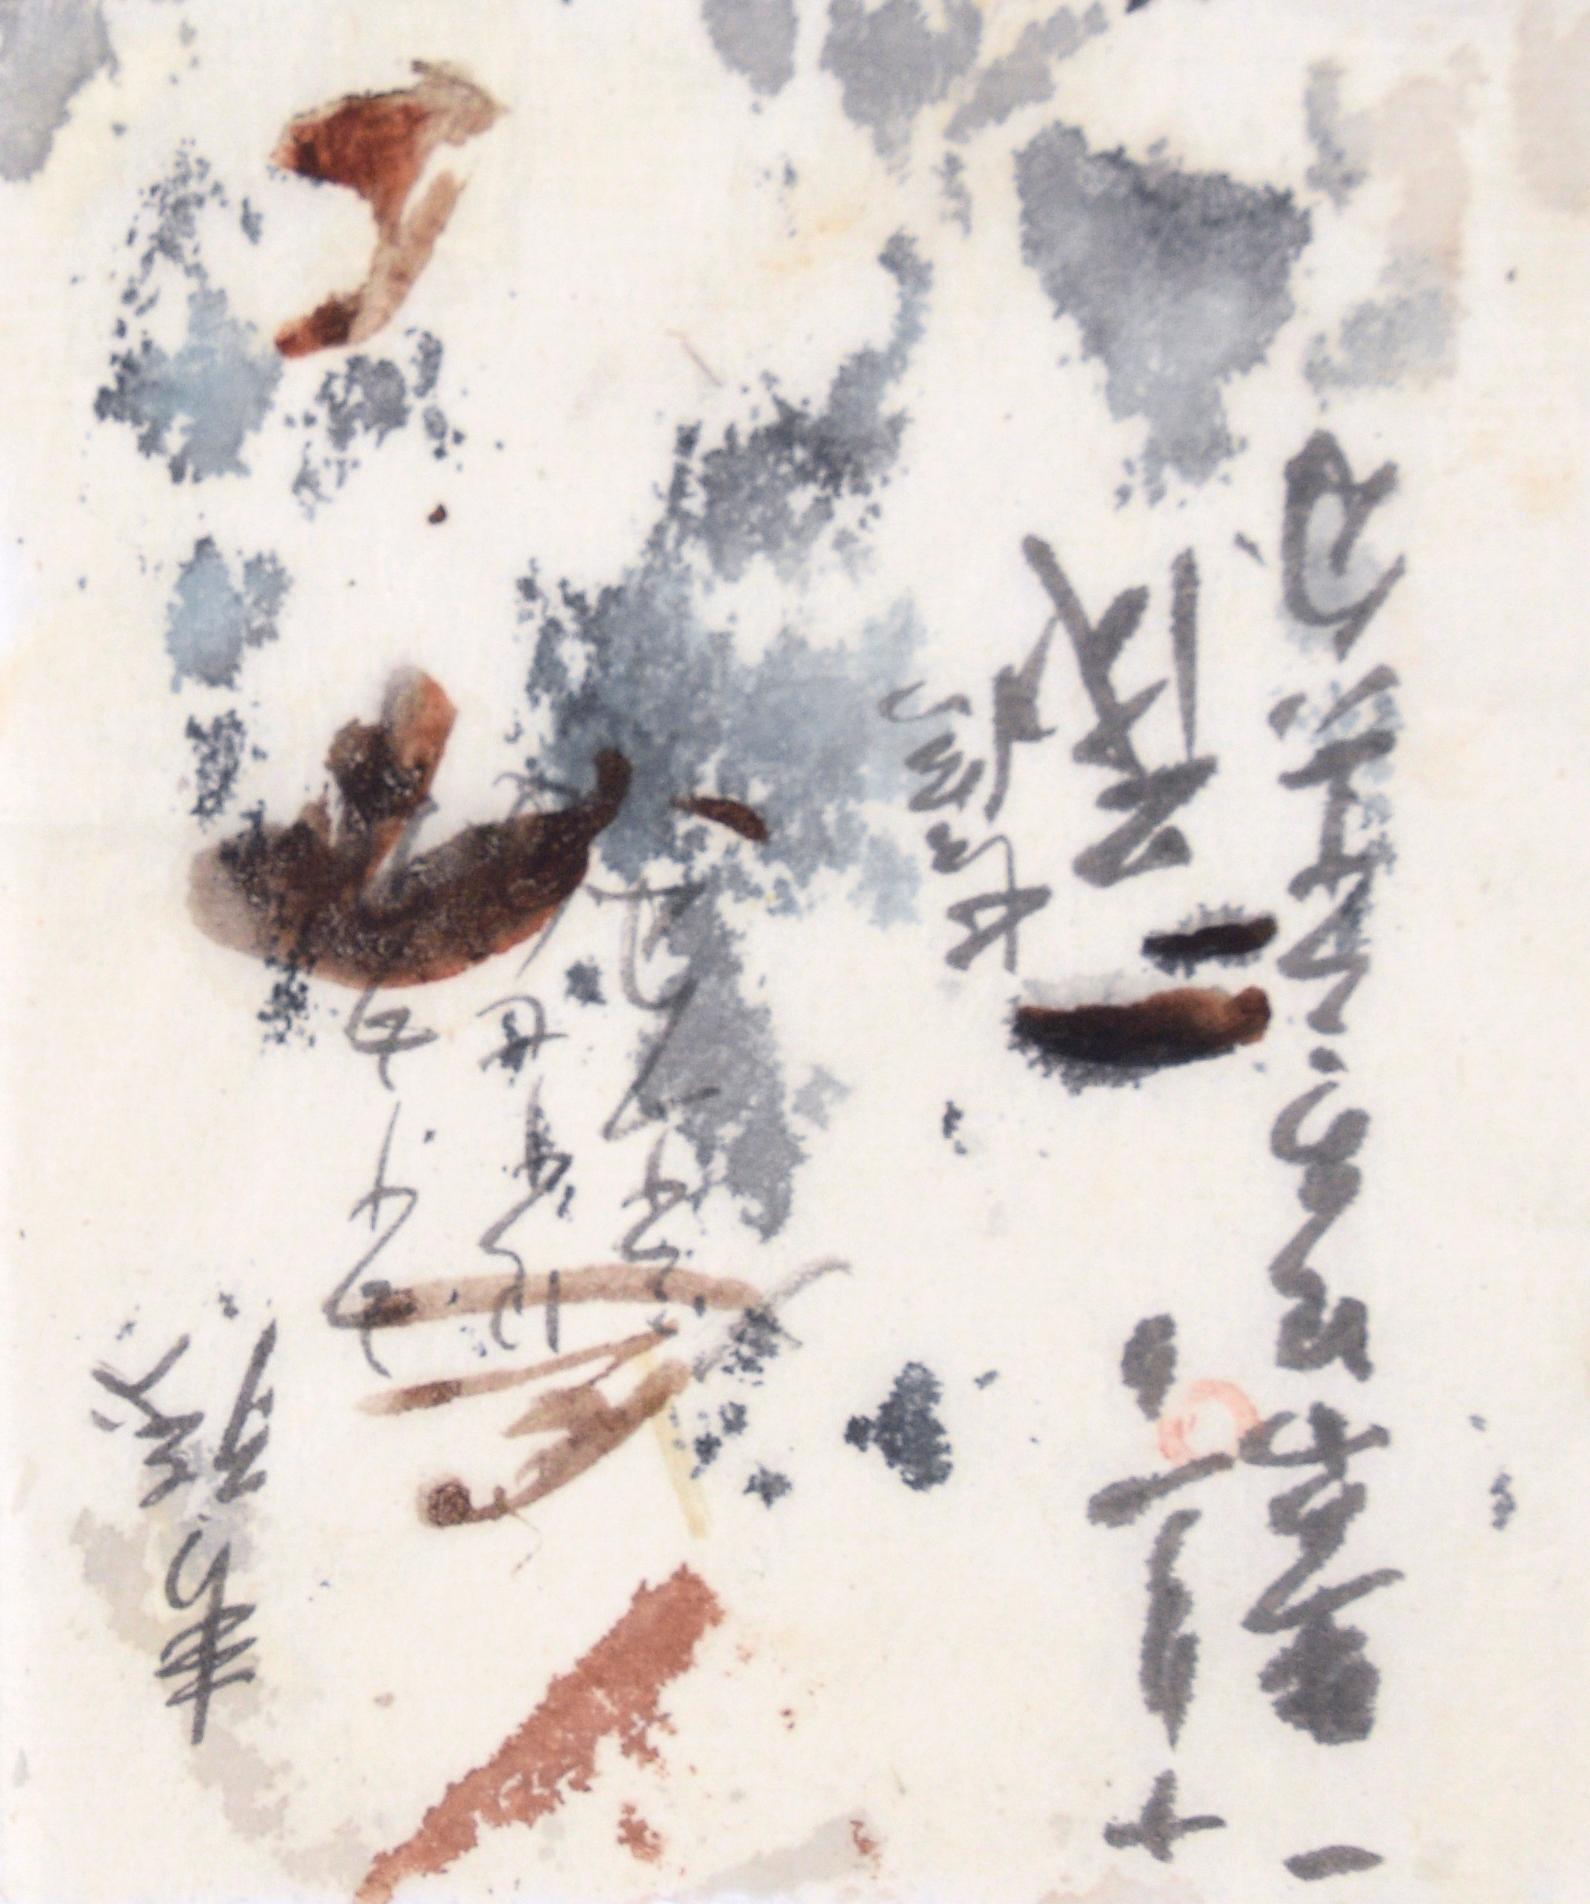 Calligraphy Abstract Panorama III - Japanese Calligraphy on Rice Paper
Landscape and Calligraphy on rice paper by Michael Pauker (American, 20th c).
Signed by the artist in the bottom right corner in red pencil, 